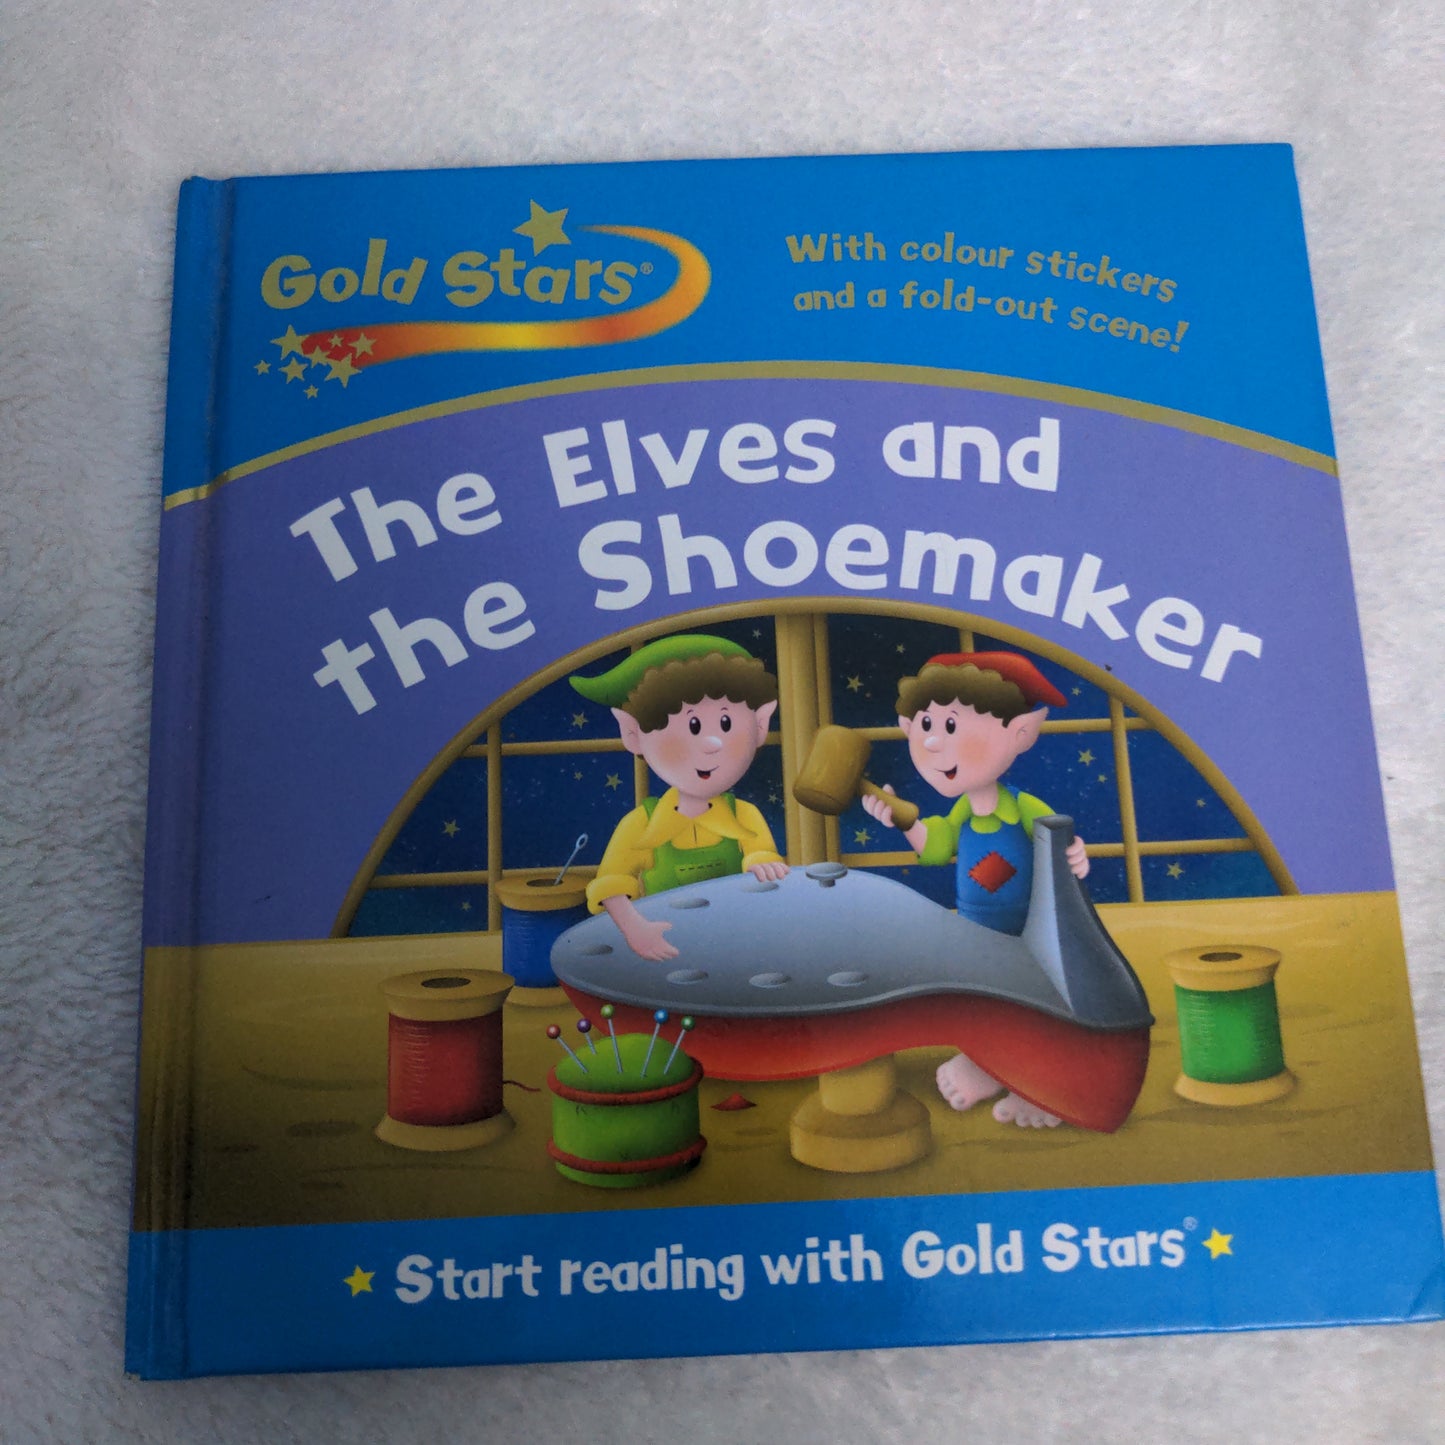 The Elves and the Shoemaker - Very good condition